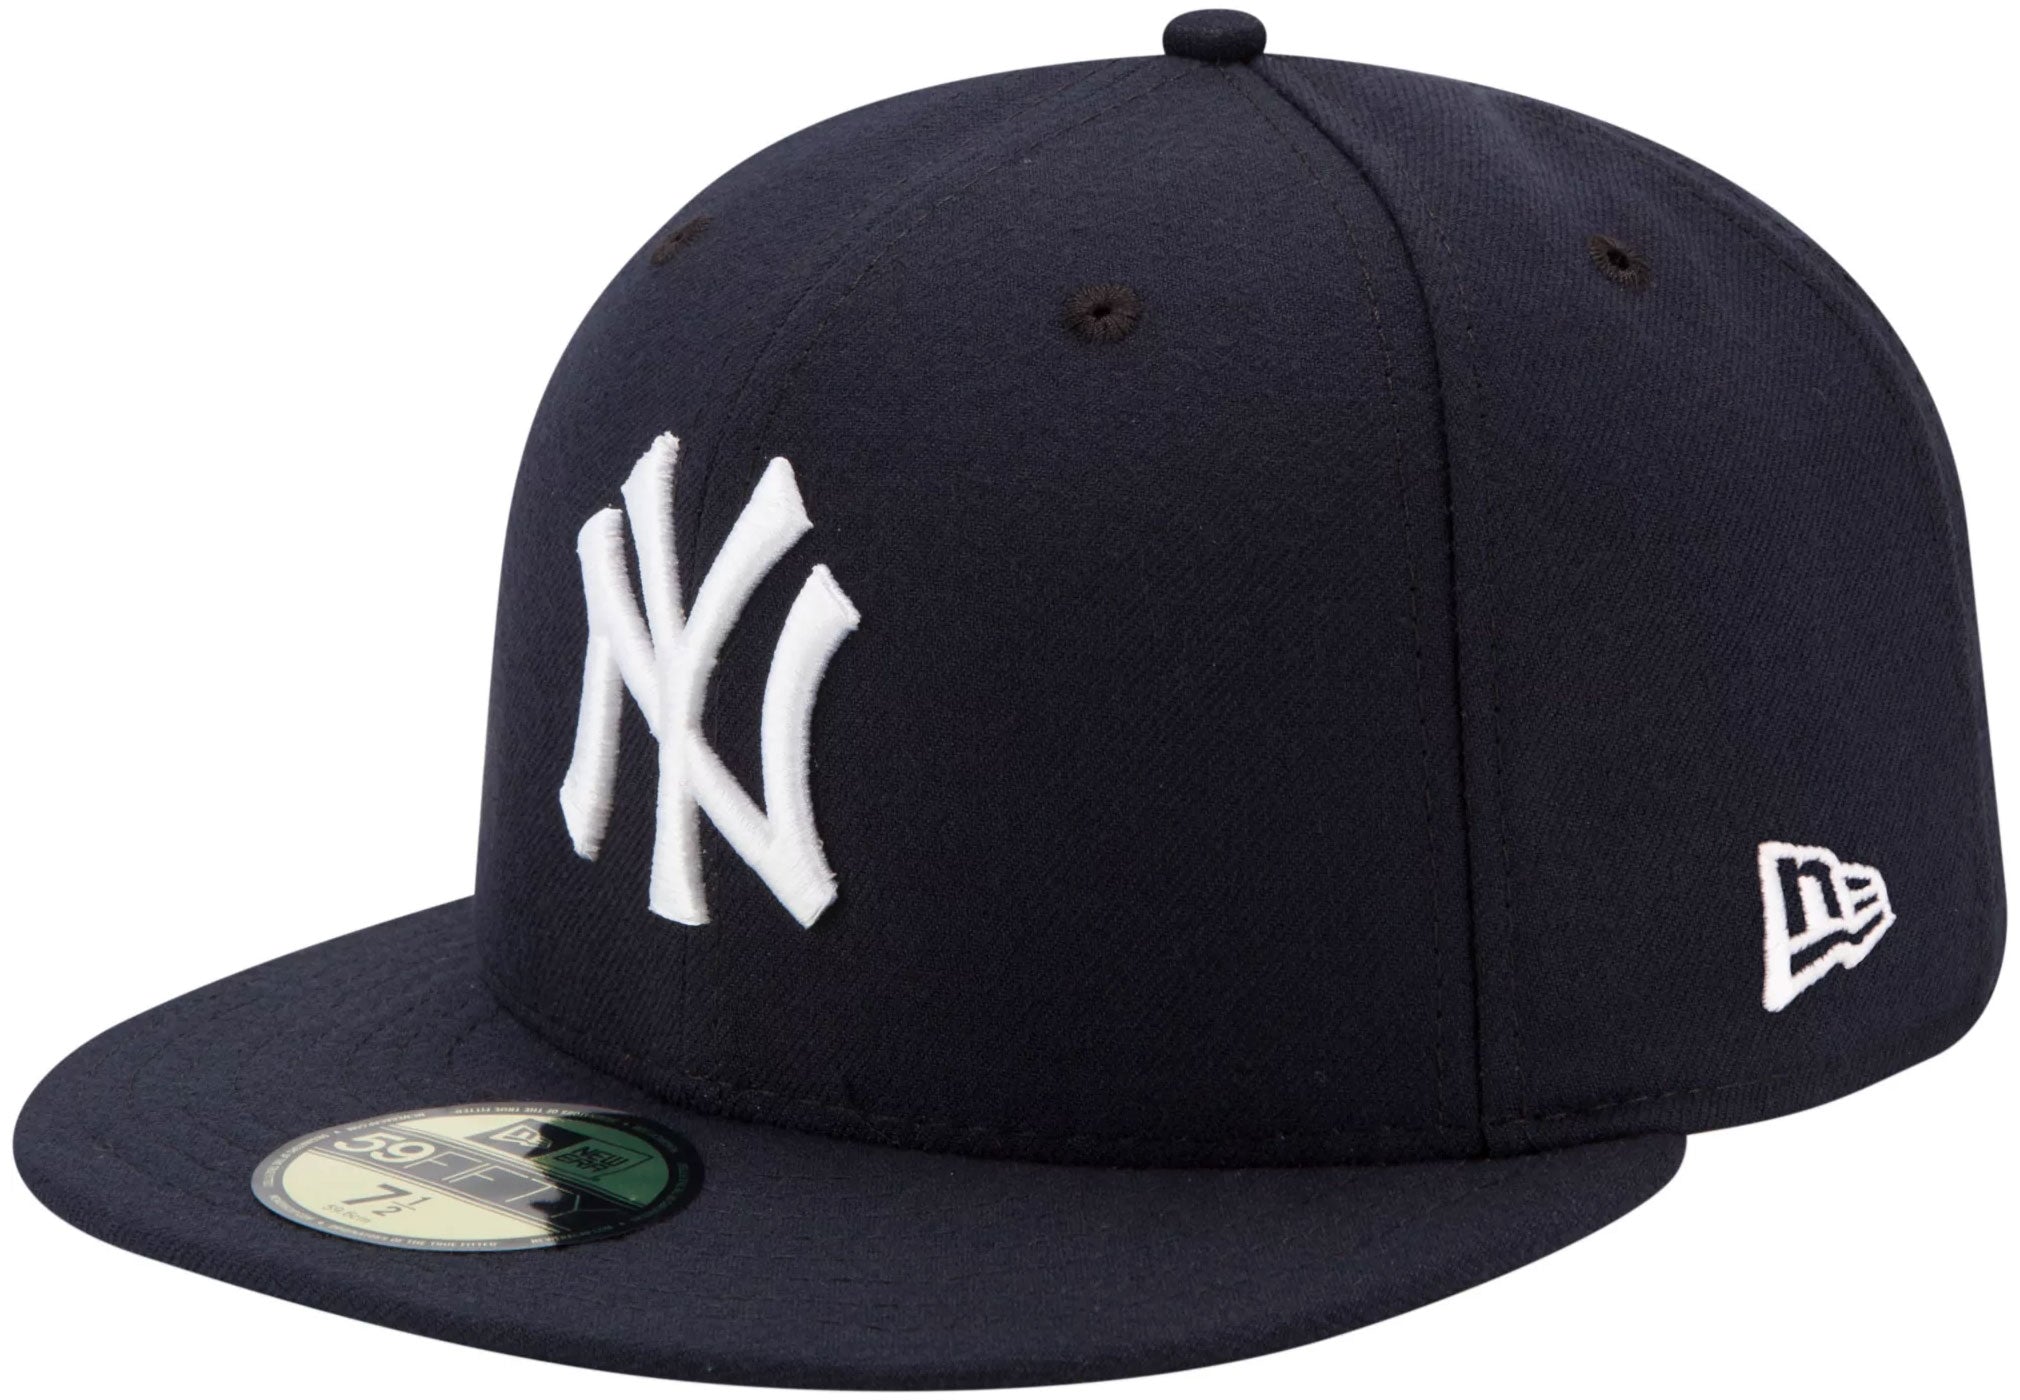 New Era Cap Black 59FIFTY Fitted Hat Ornament, by New Era